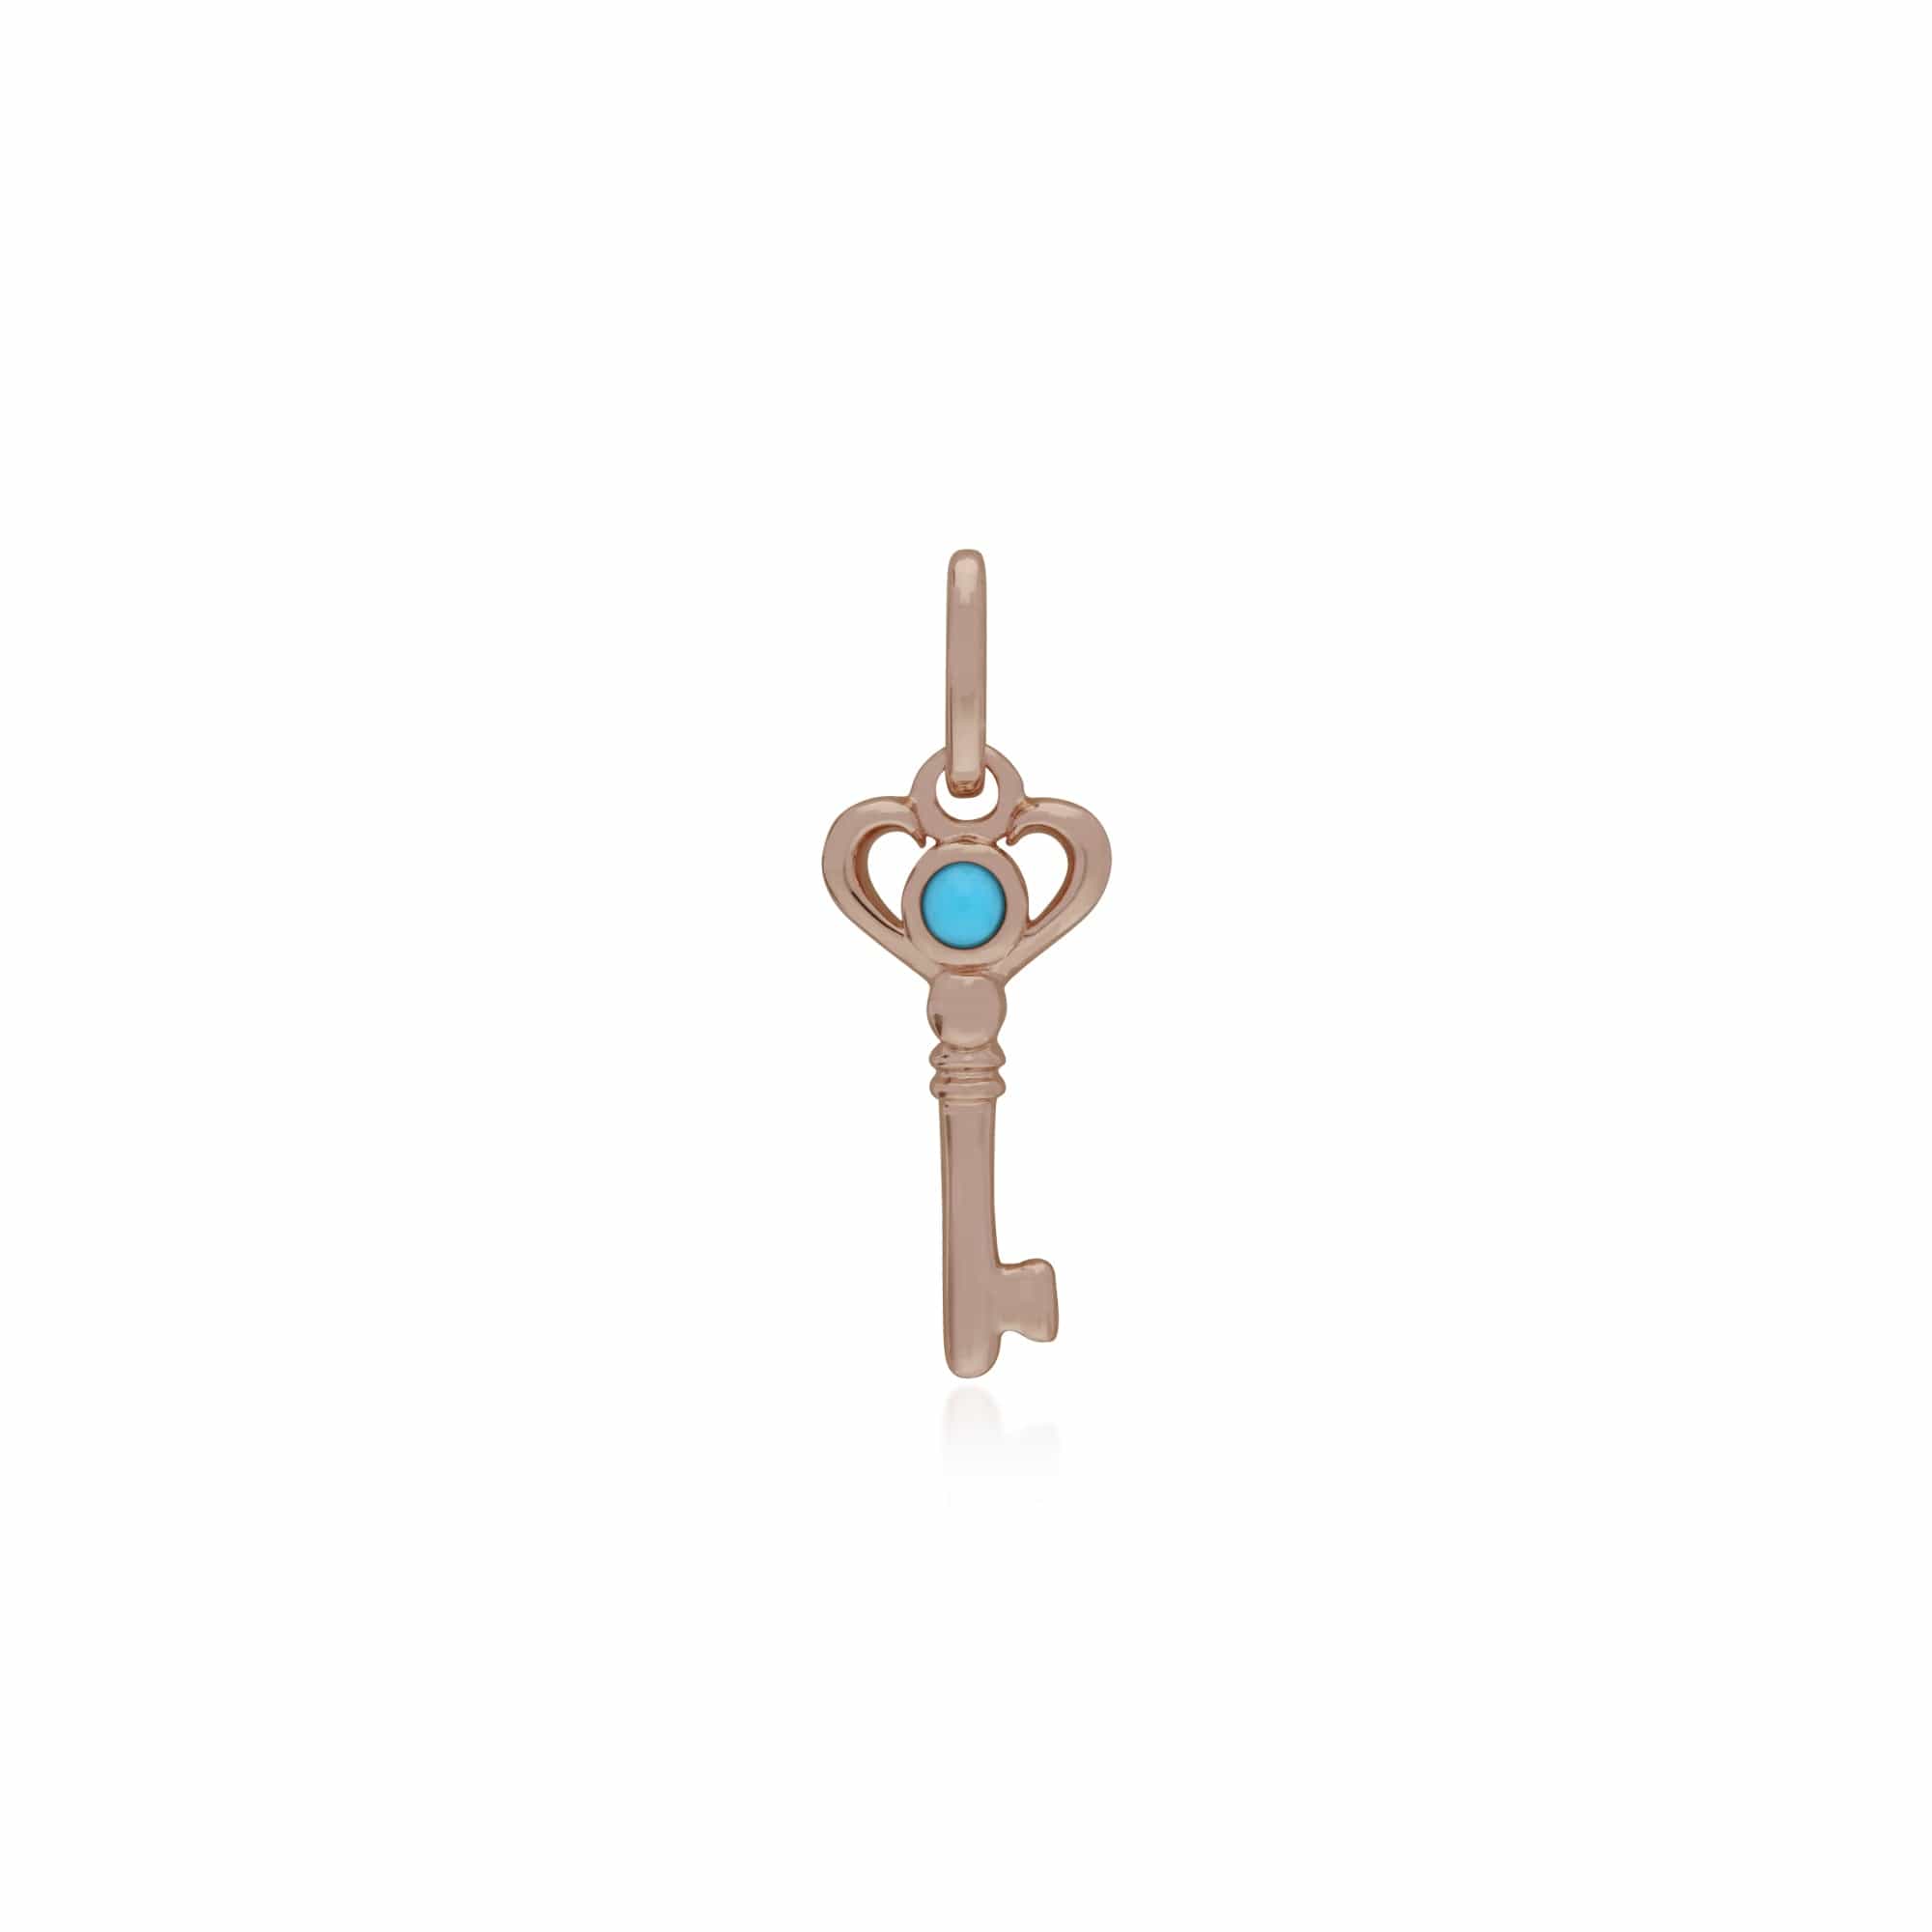 270P027402925-270P026901925 Classic Heart Lock Pendant & Turquoise Key Charm in Rose Gold Plated 925 Sterling Silver 2